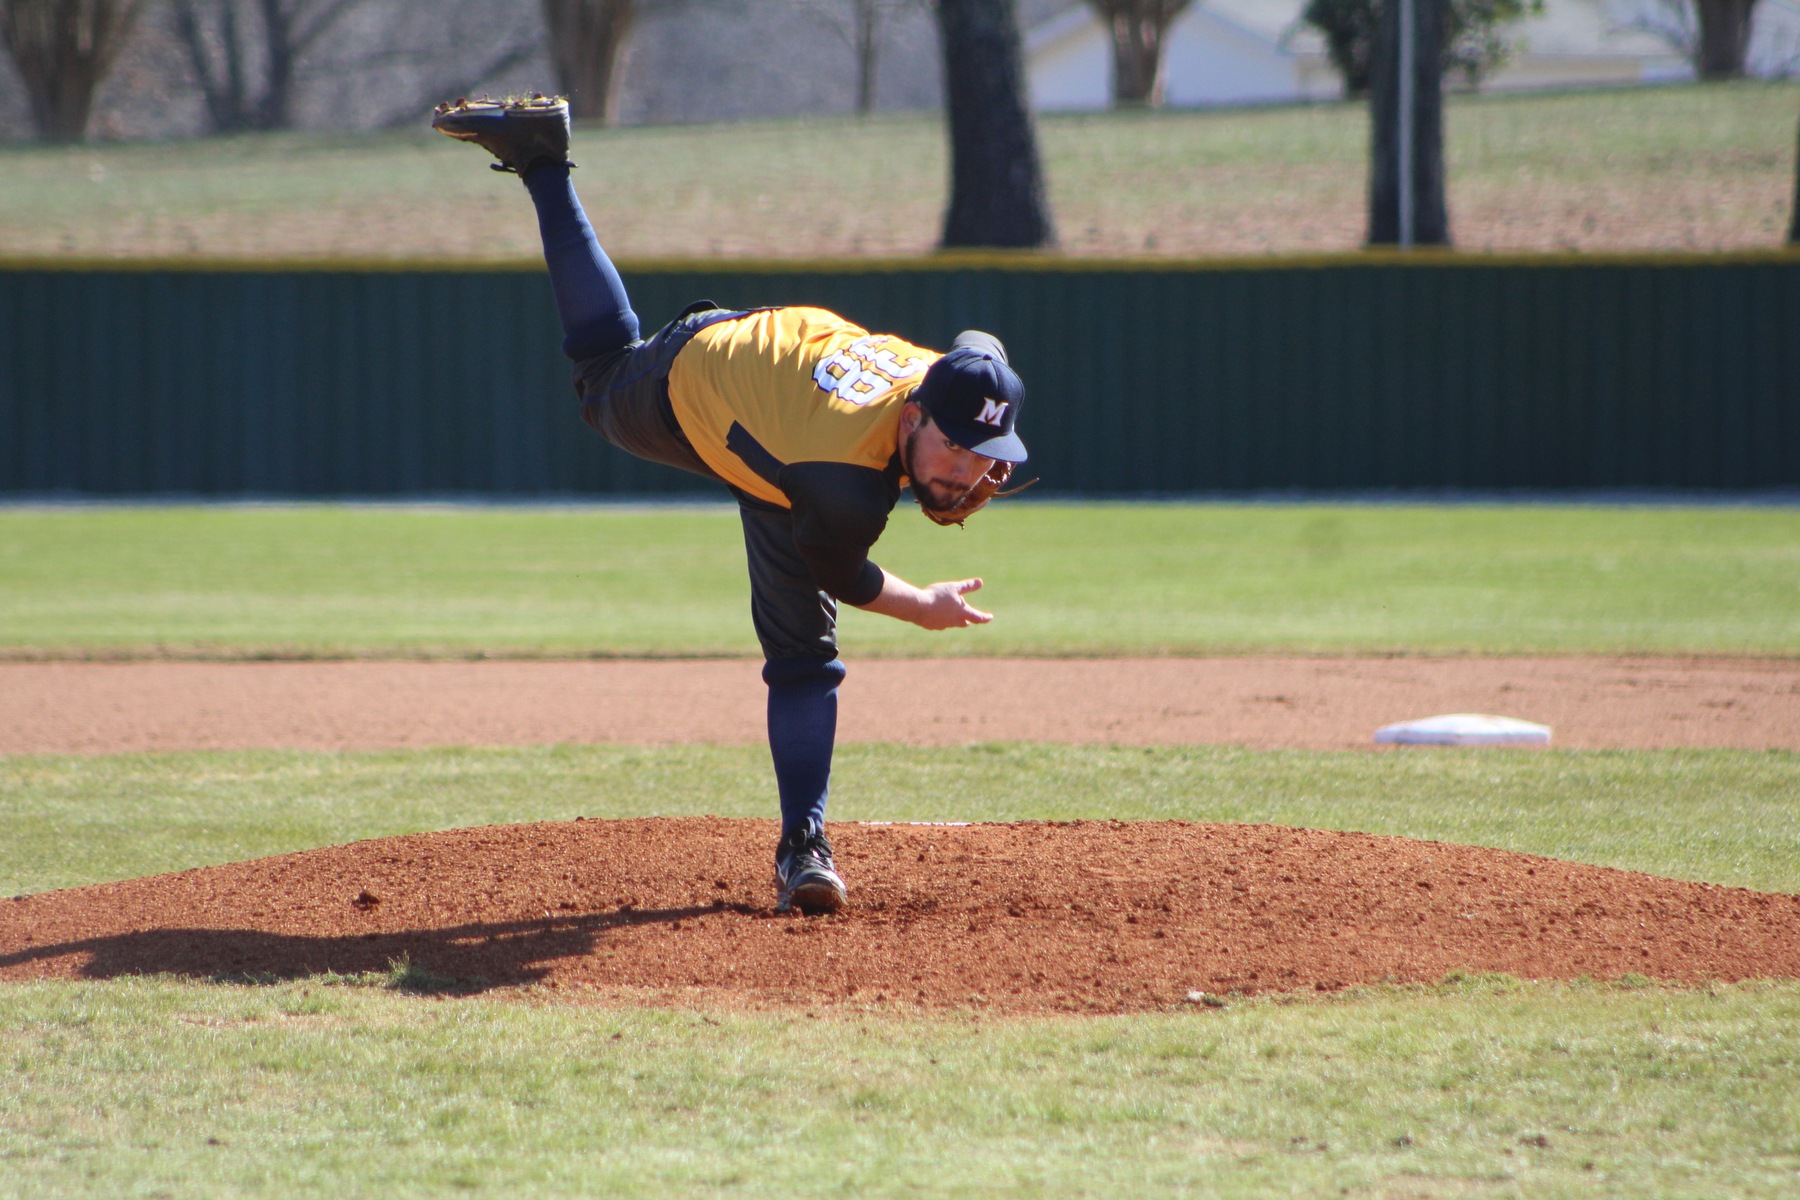 Cole Baker picked up his first win as a Tiger, going five innings while allowing just one hit vs. Roane State